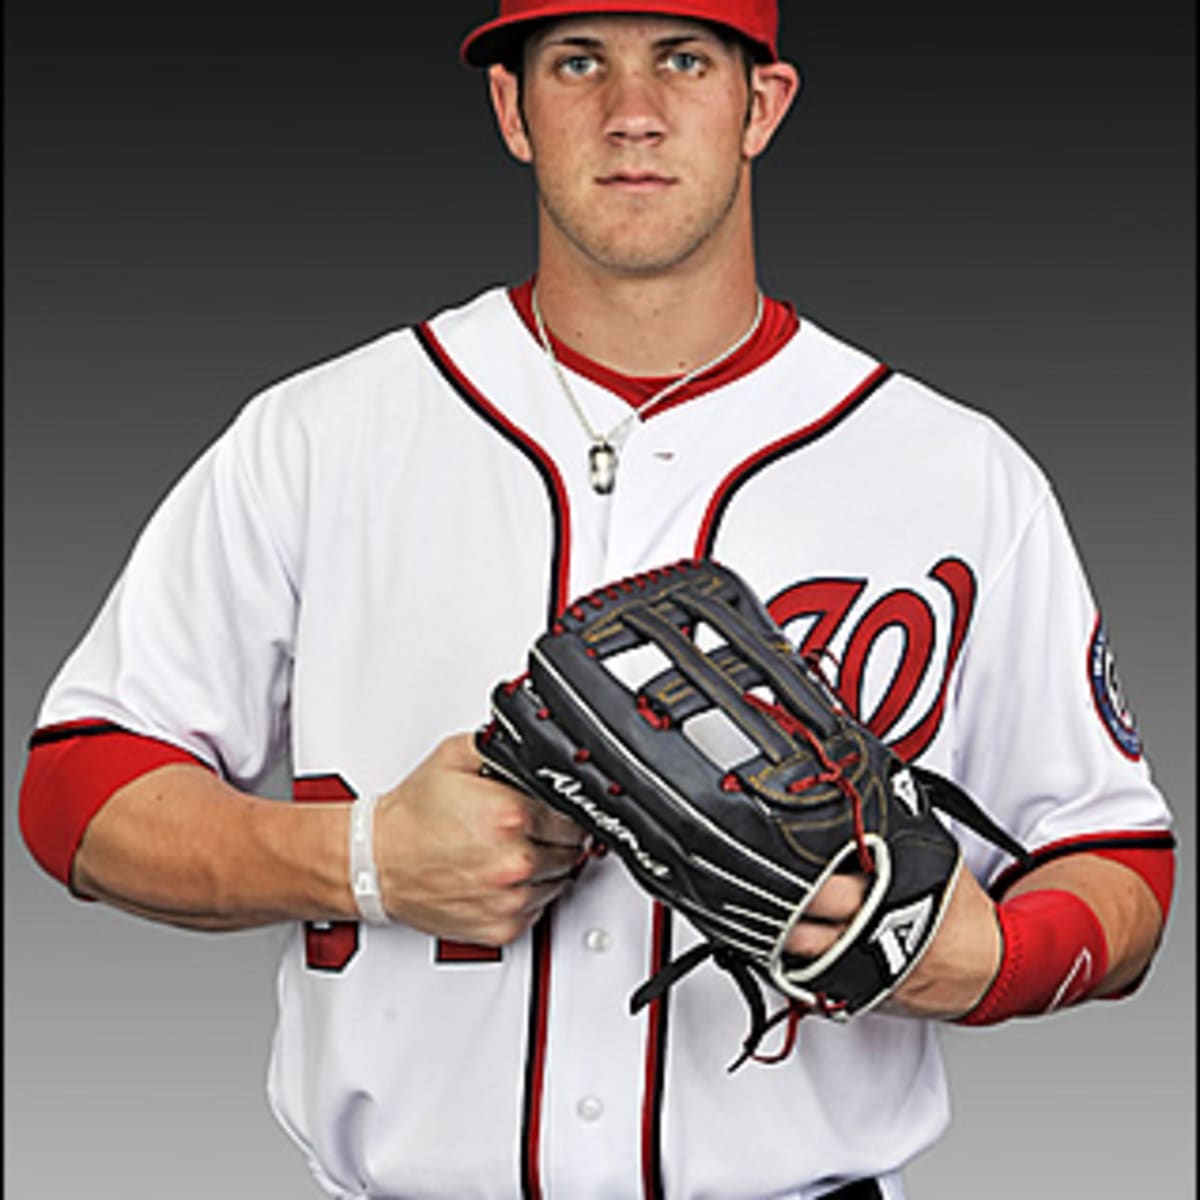 Can Bryce Harper Make it to the Majors? - SI Kids: Sports News for